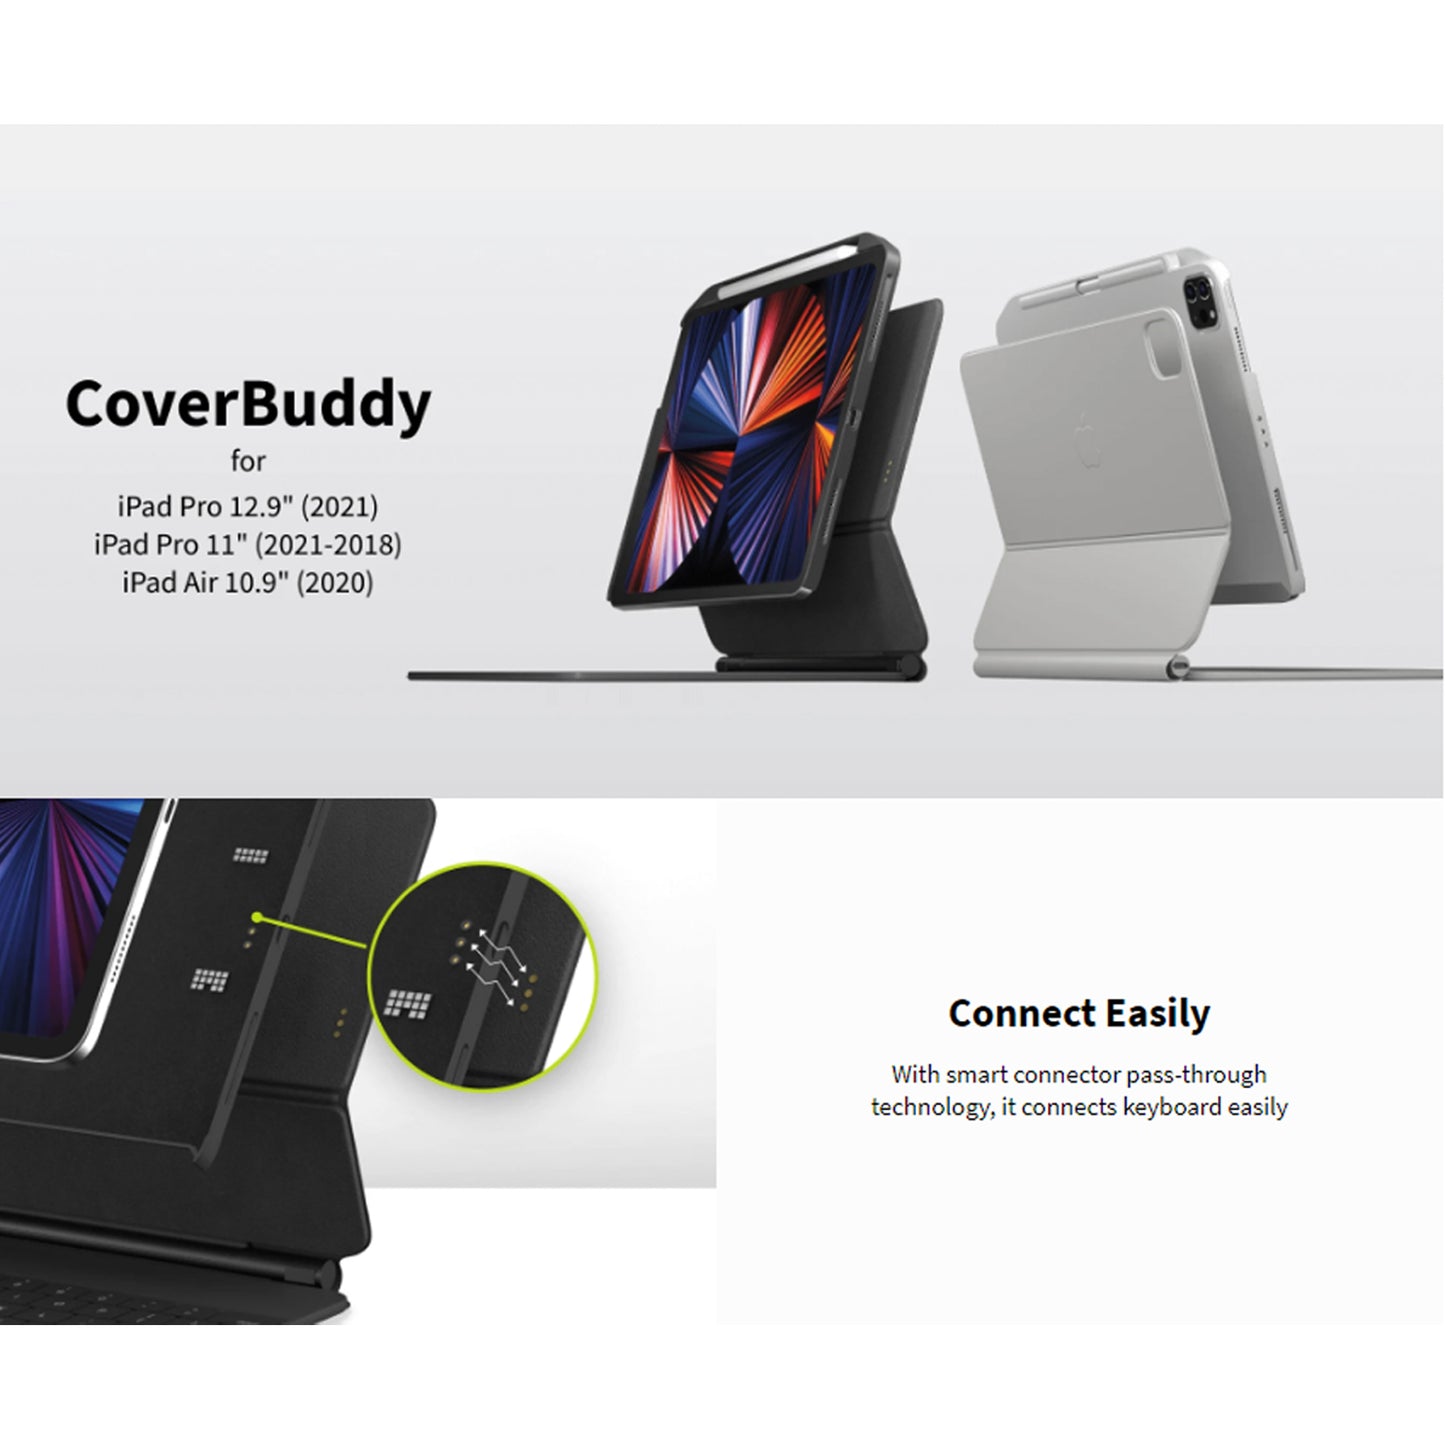 SwitchEasy Coverbuddy for iPad Pro 11" - Air 10.9" ( 2022 - 2018 ) M1 Chip - Black (Barcode: 4895241101014 )